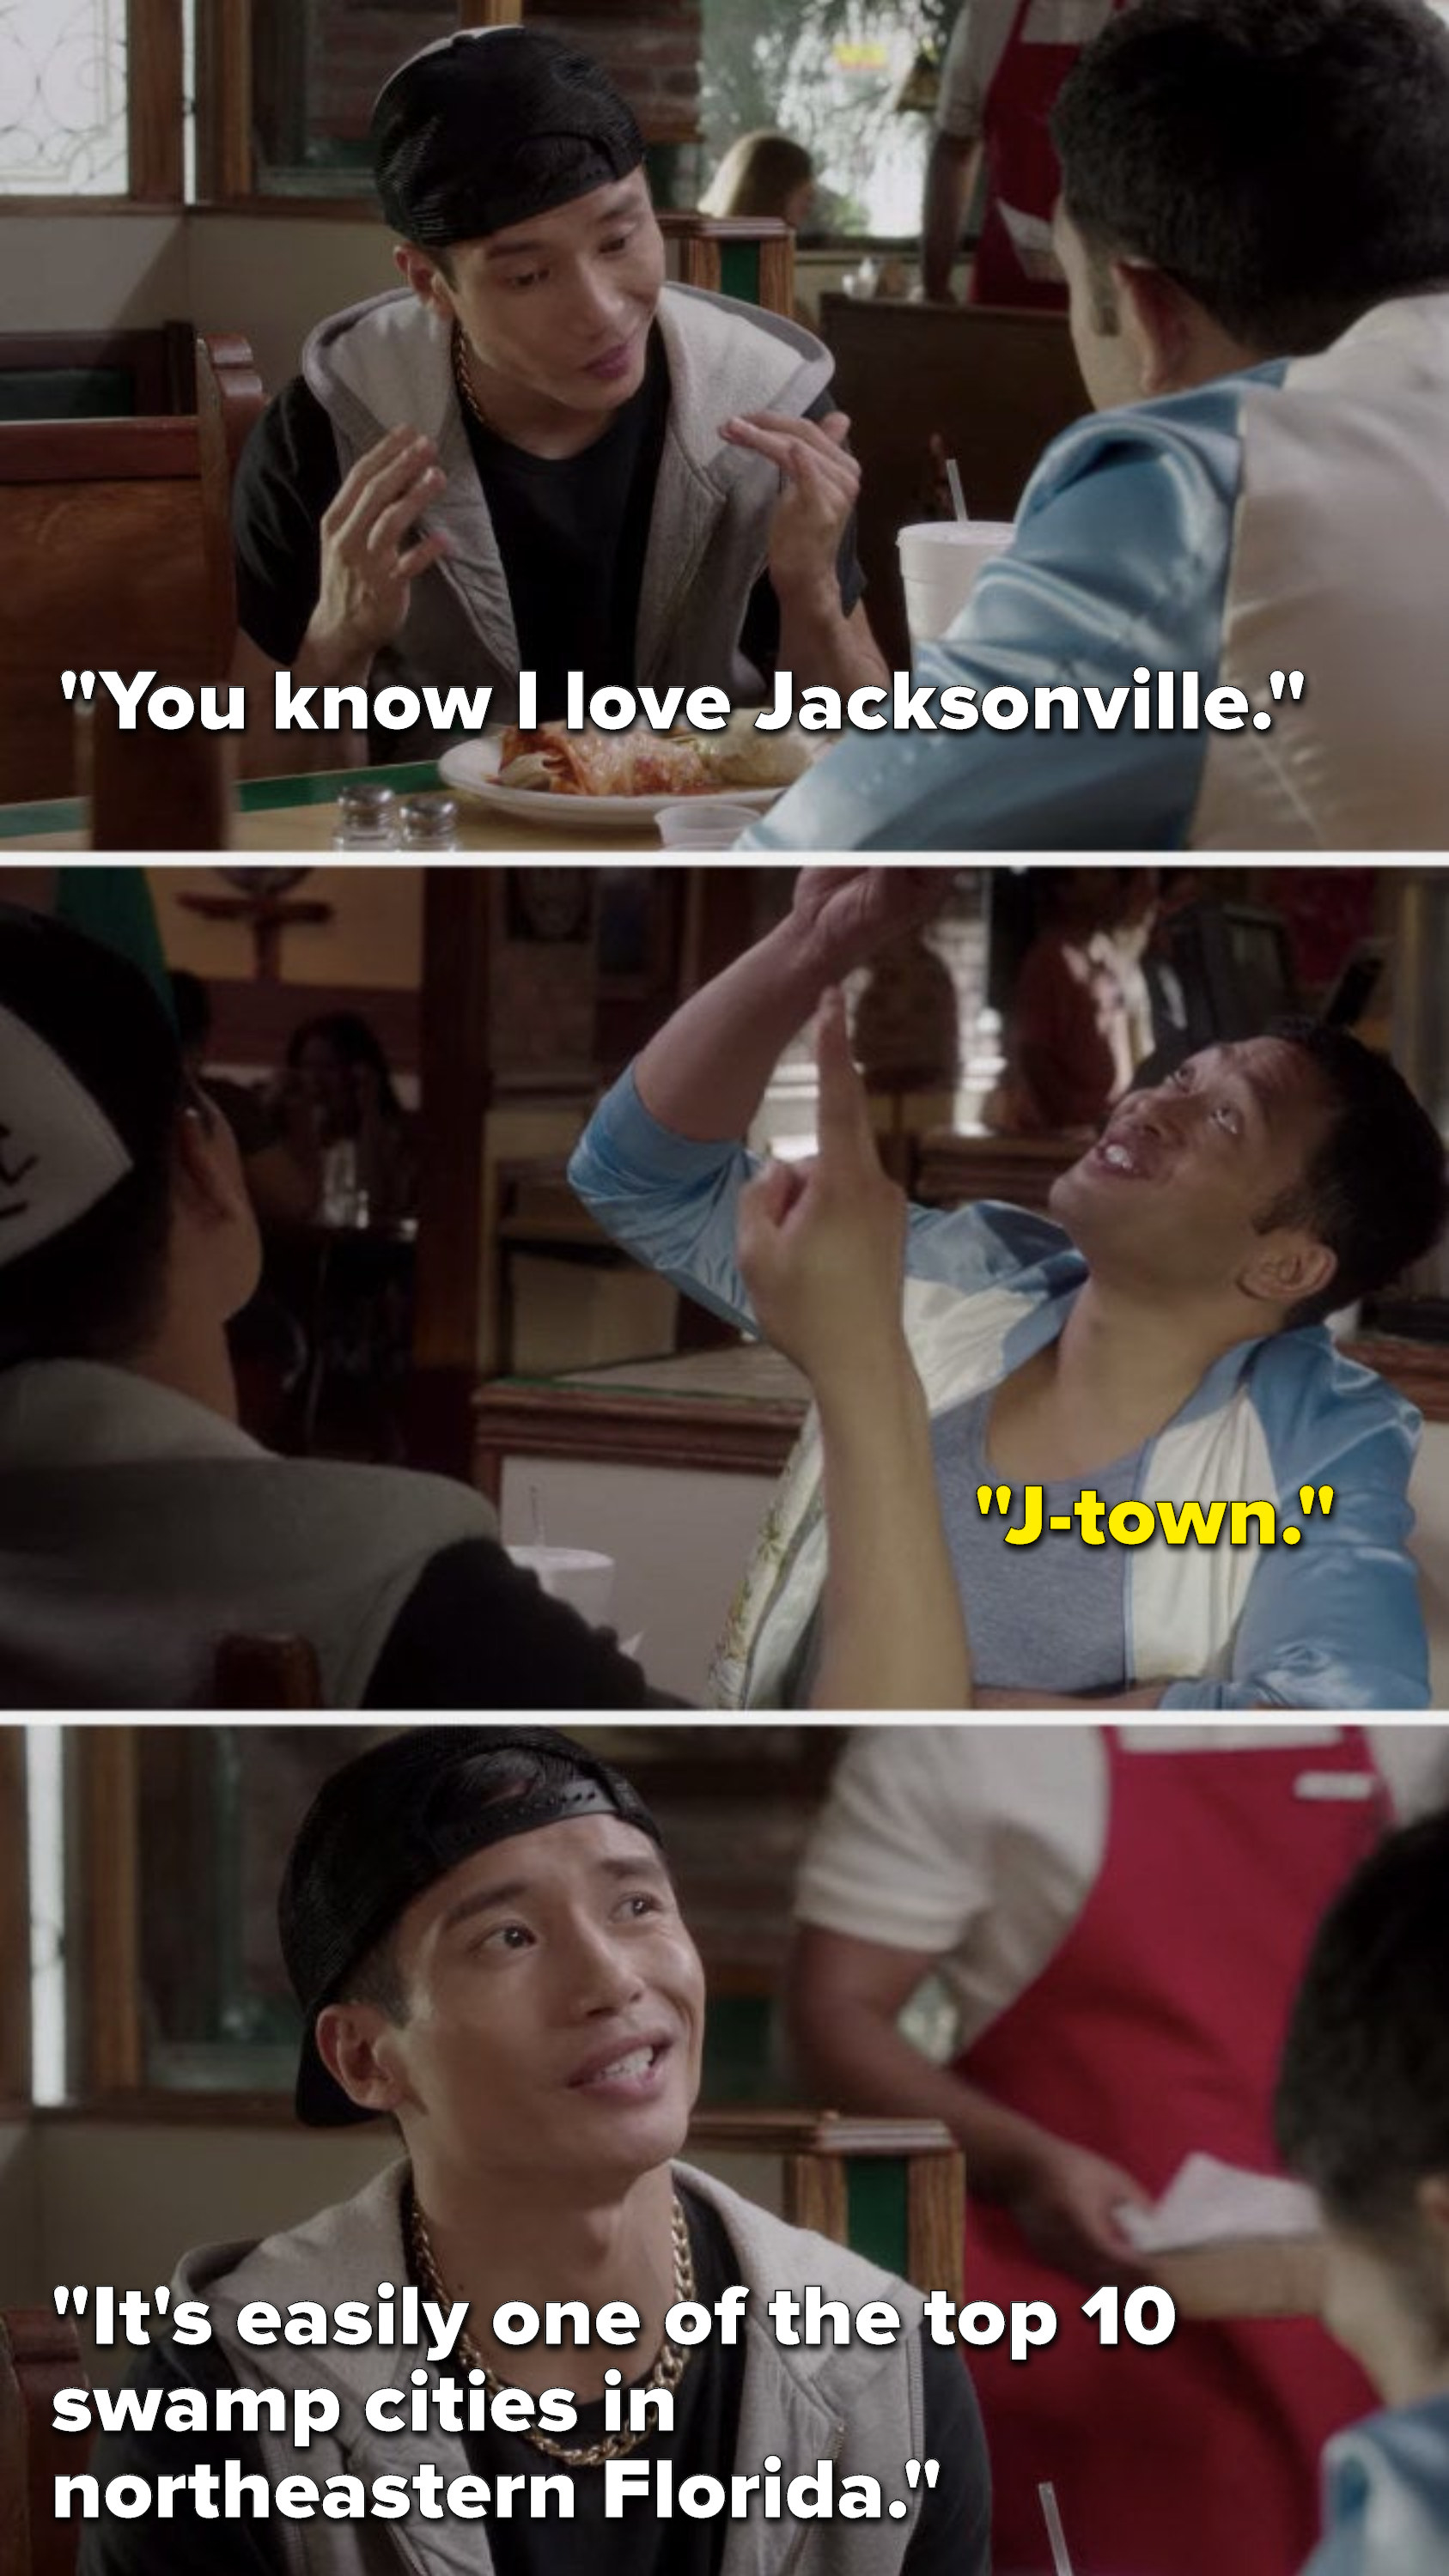 Jason says, &quot;You know I love Jacksonville,&quot; Pillboi says, &quot;J-town,&quot; and Jason says, It&#x27;s easily one of the top 10 swamp cities in northeastern Florida&quot;